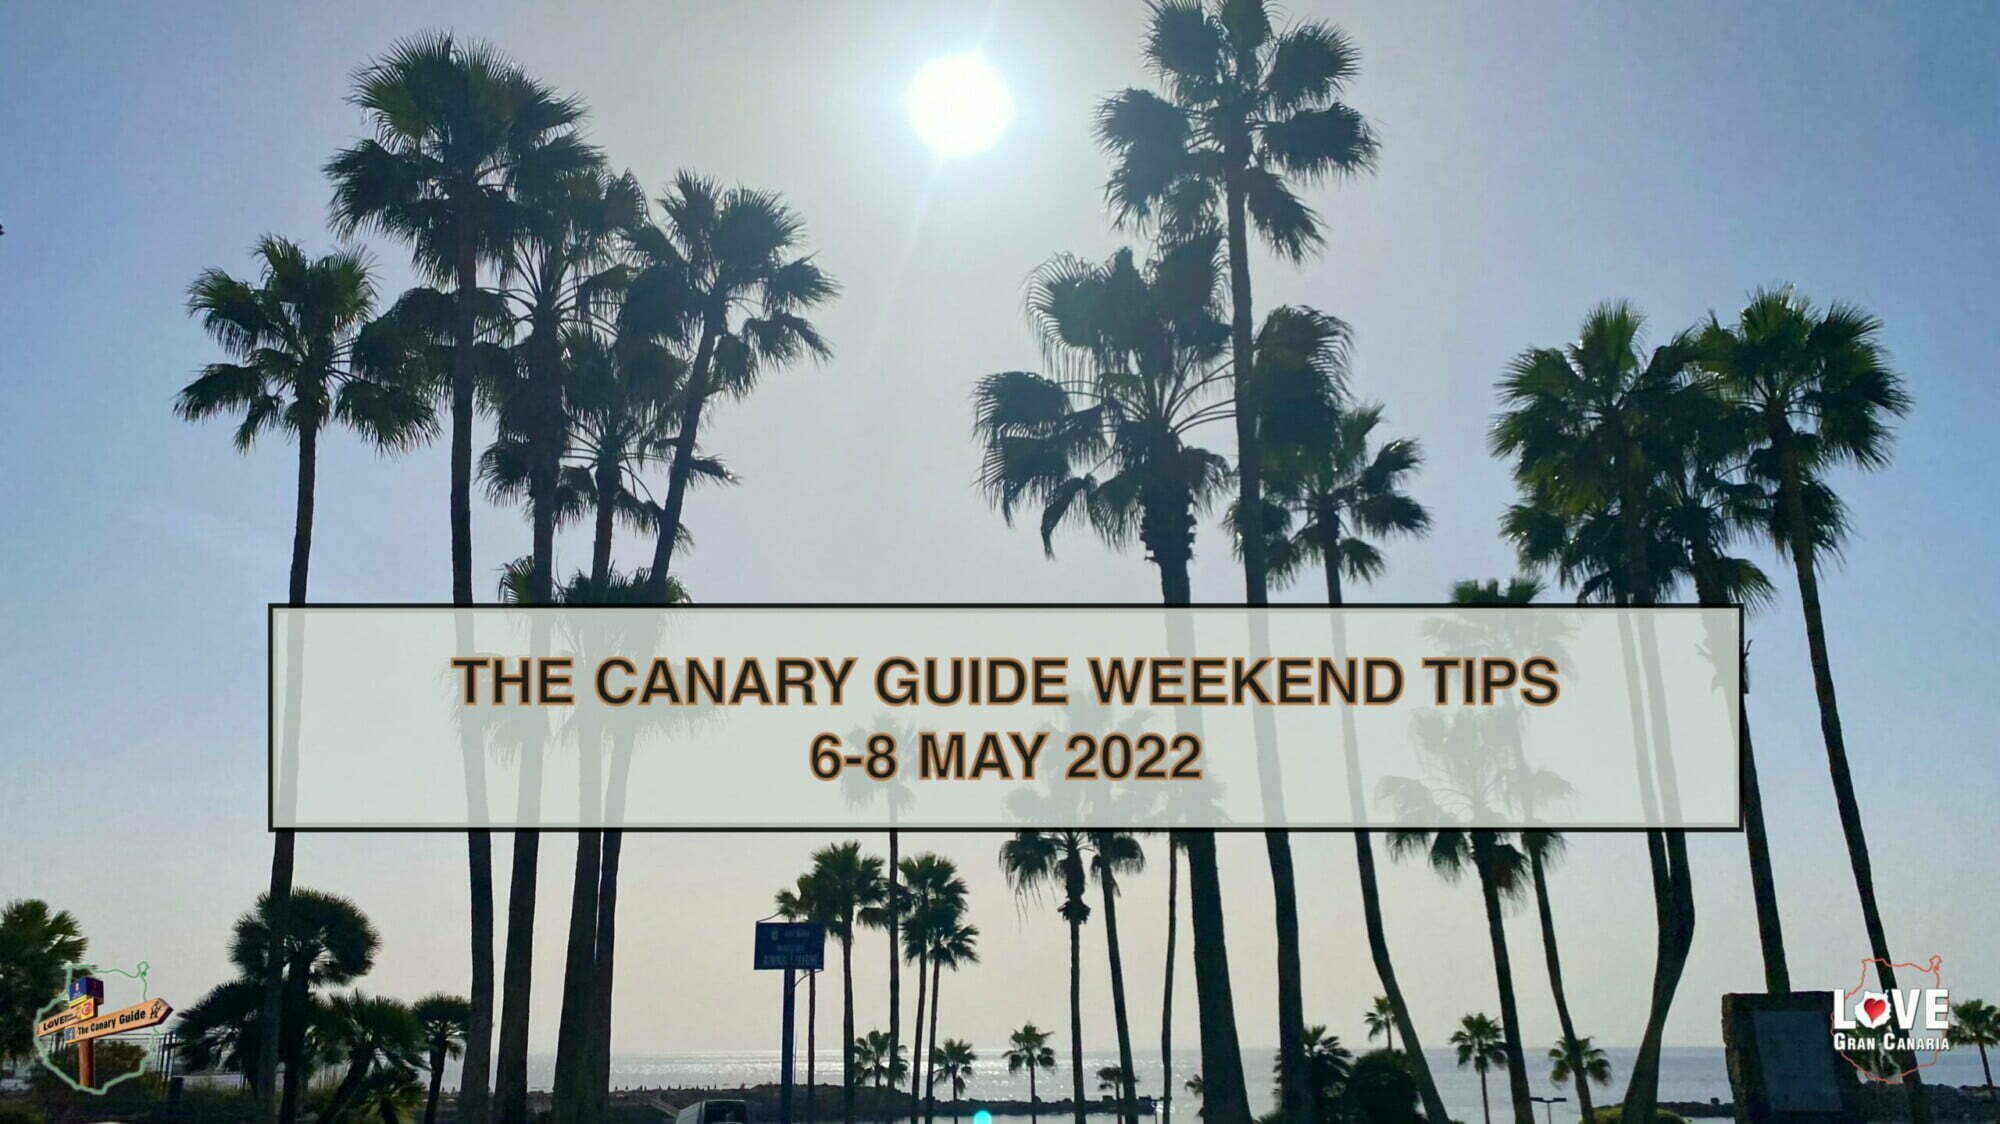 The Canary Guide #WeekendTips 6-8 May 2022